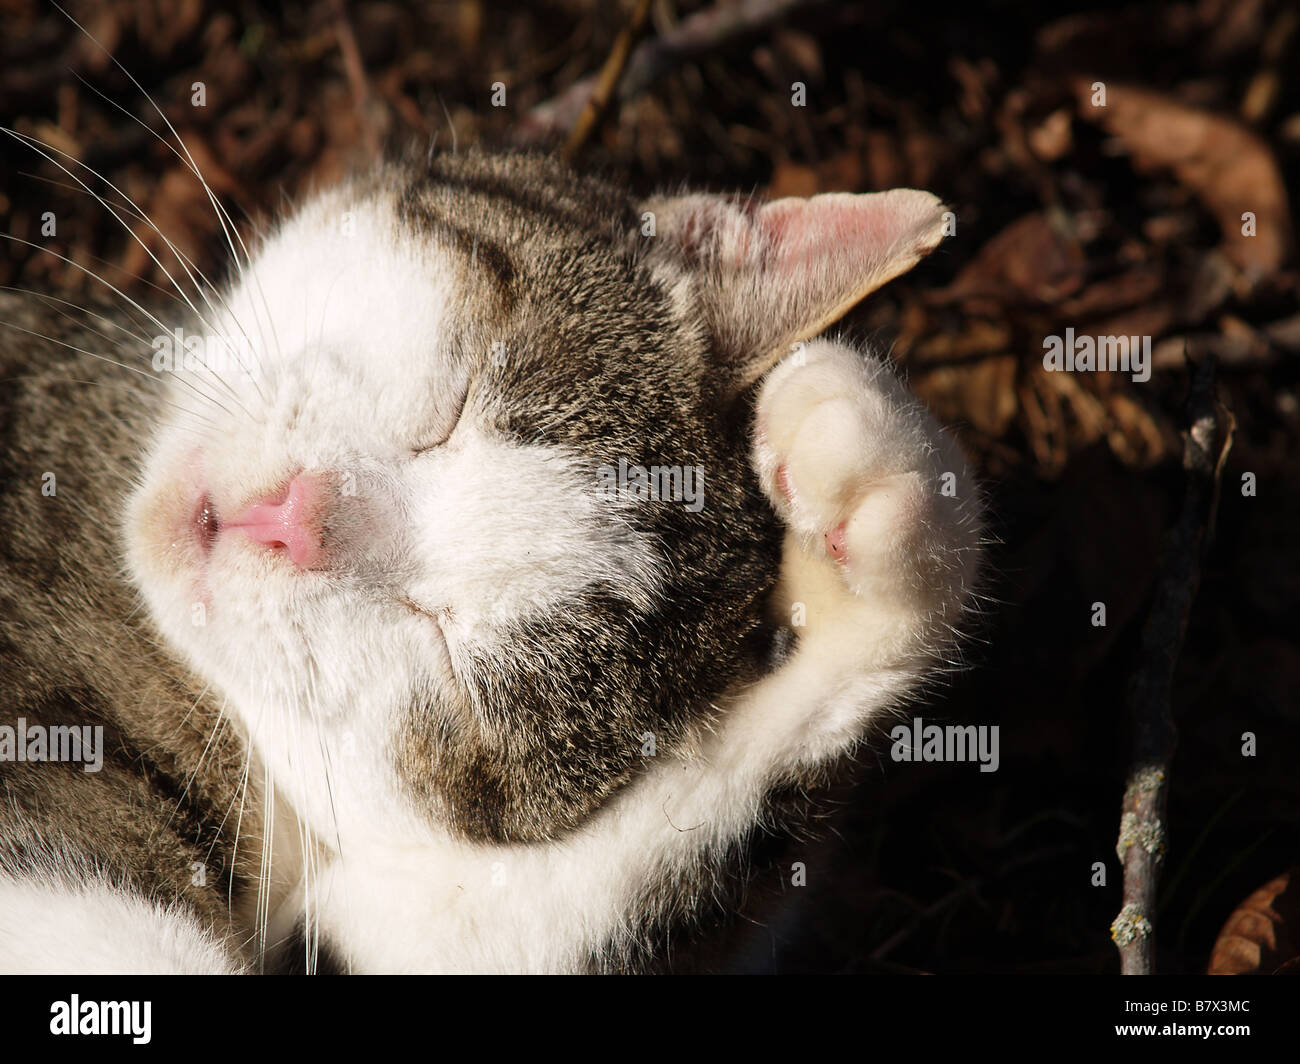 a cat cleaning itself Stock Photo